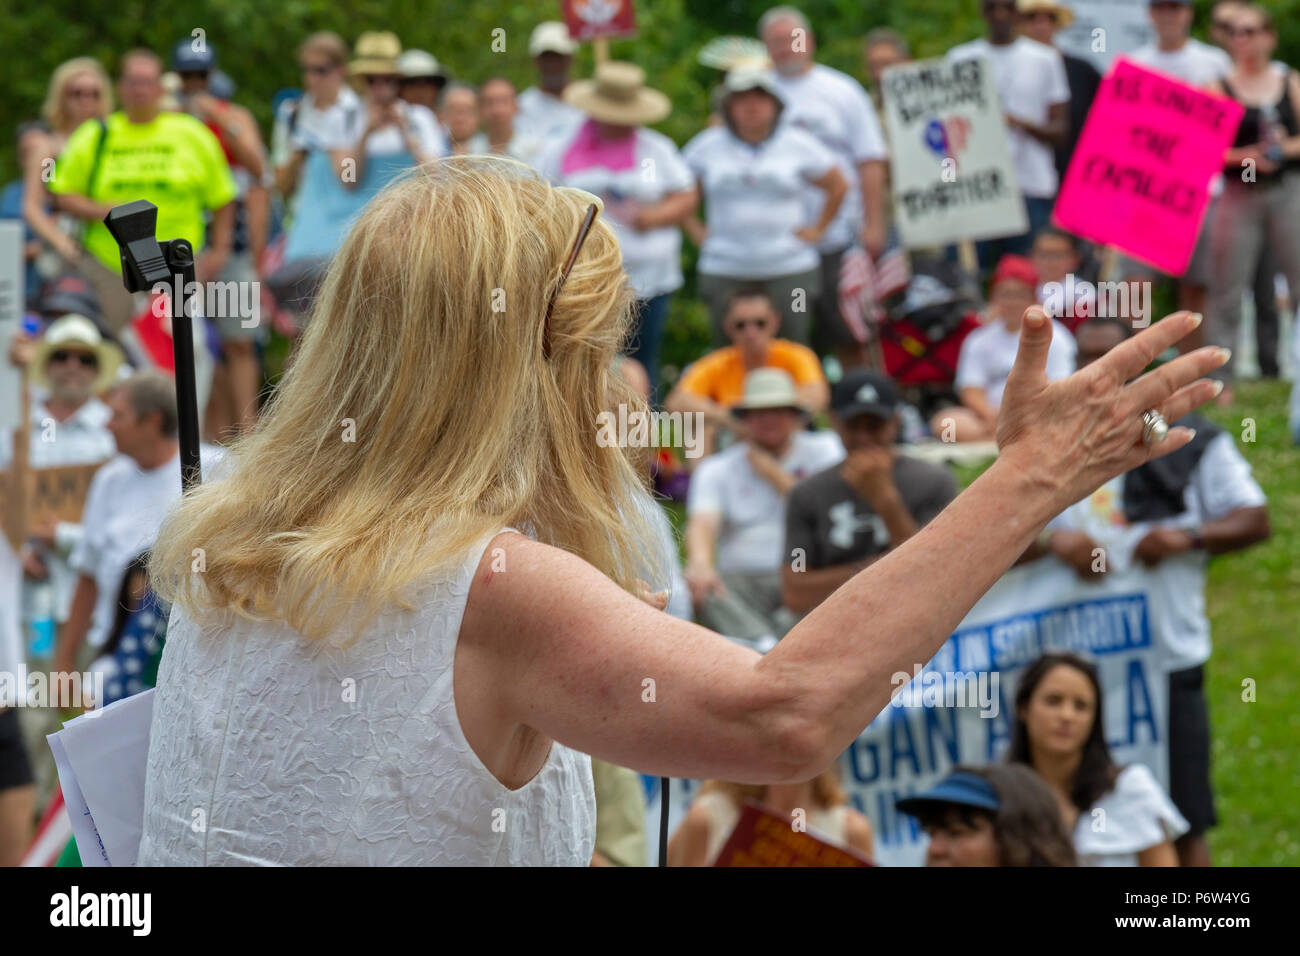 Detroit, Michigan - Congresswoman Debbie Dingell (D-Mich.) speaks at a rally opposing the Trump administration's policy of separating young children f Stock Photo